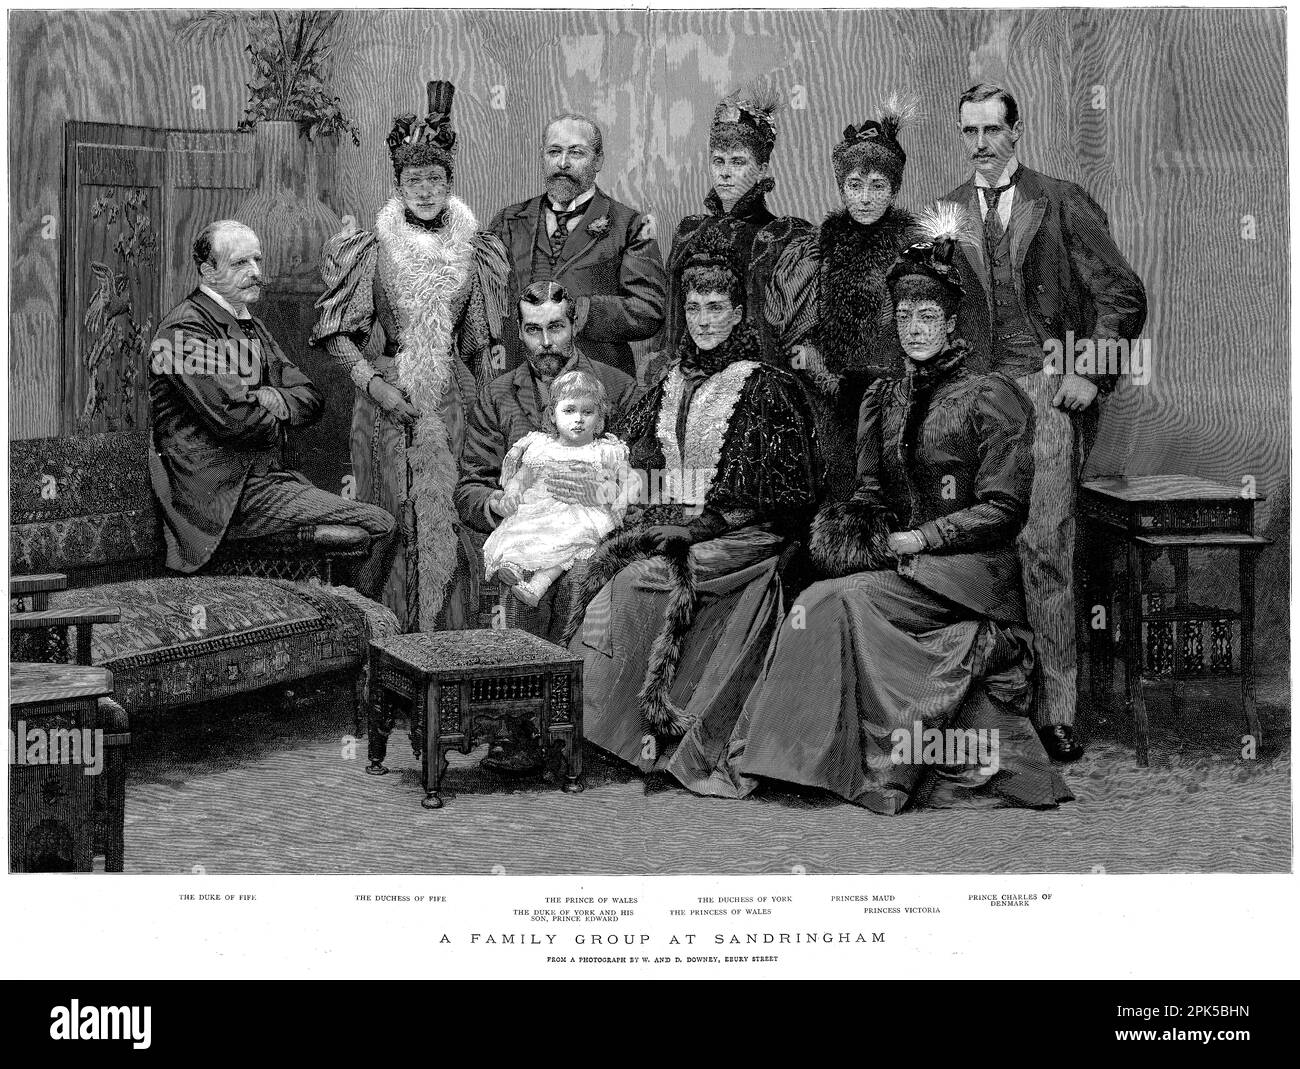 Engraving of members of the royal family at Sandringham, published  1896, (from left) the Duke of Fife, The Duchess of Fife, The Prince of Wales, the Duke of York and his son, Prince Edward, the Princess of Wales, the Duchess of York, Princess Maud, Princess Victoria and Prince Charles of Denmark. Stock Photo